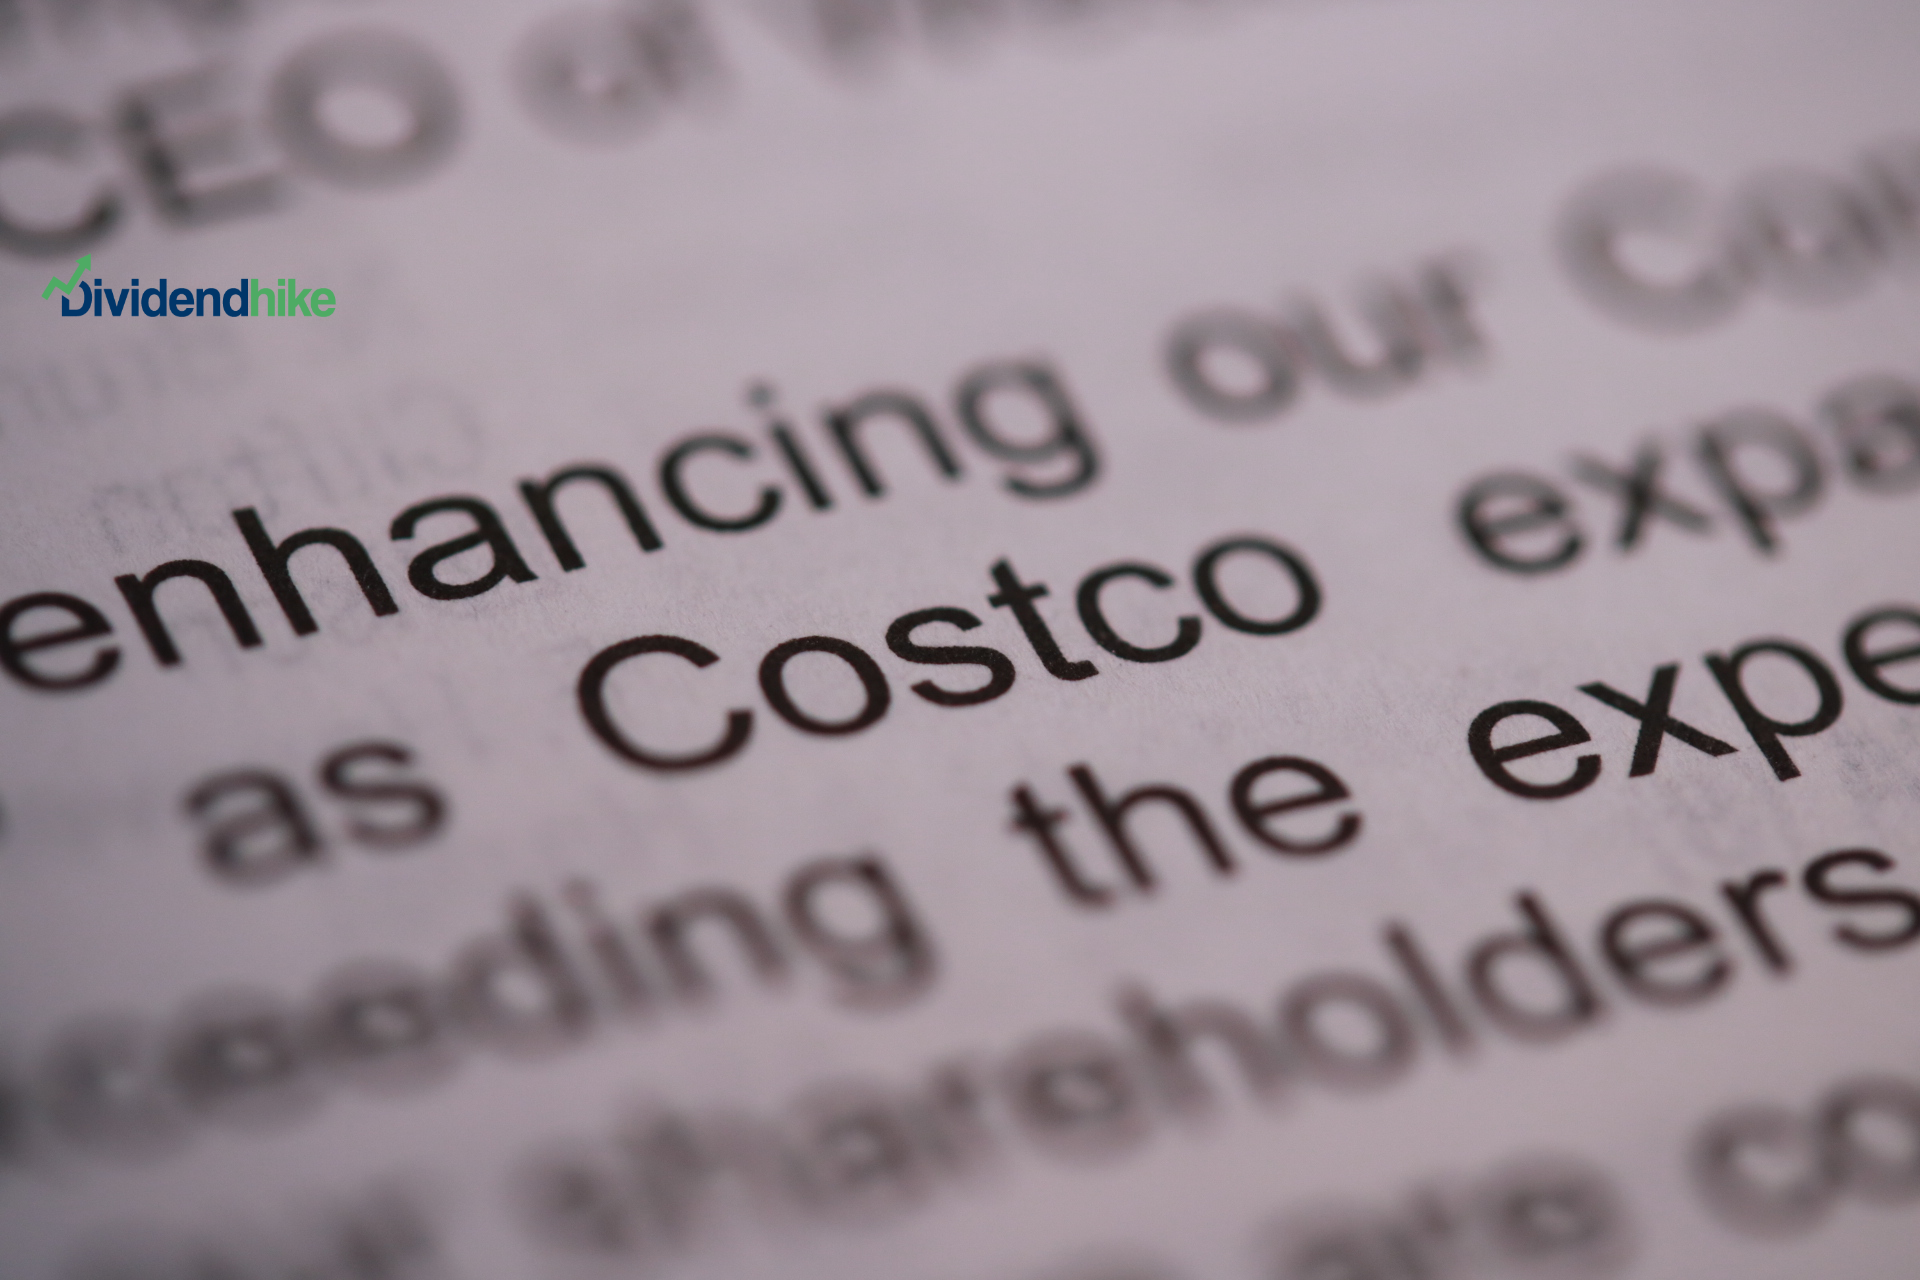 Costco Wholesale is one of the few companies announcing a dividend hike during the COVID-19 pandemic © dividendhike.com